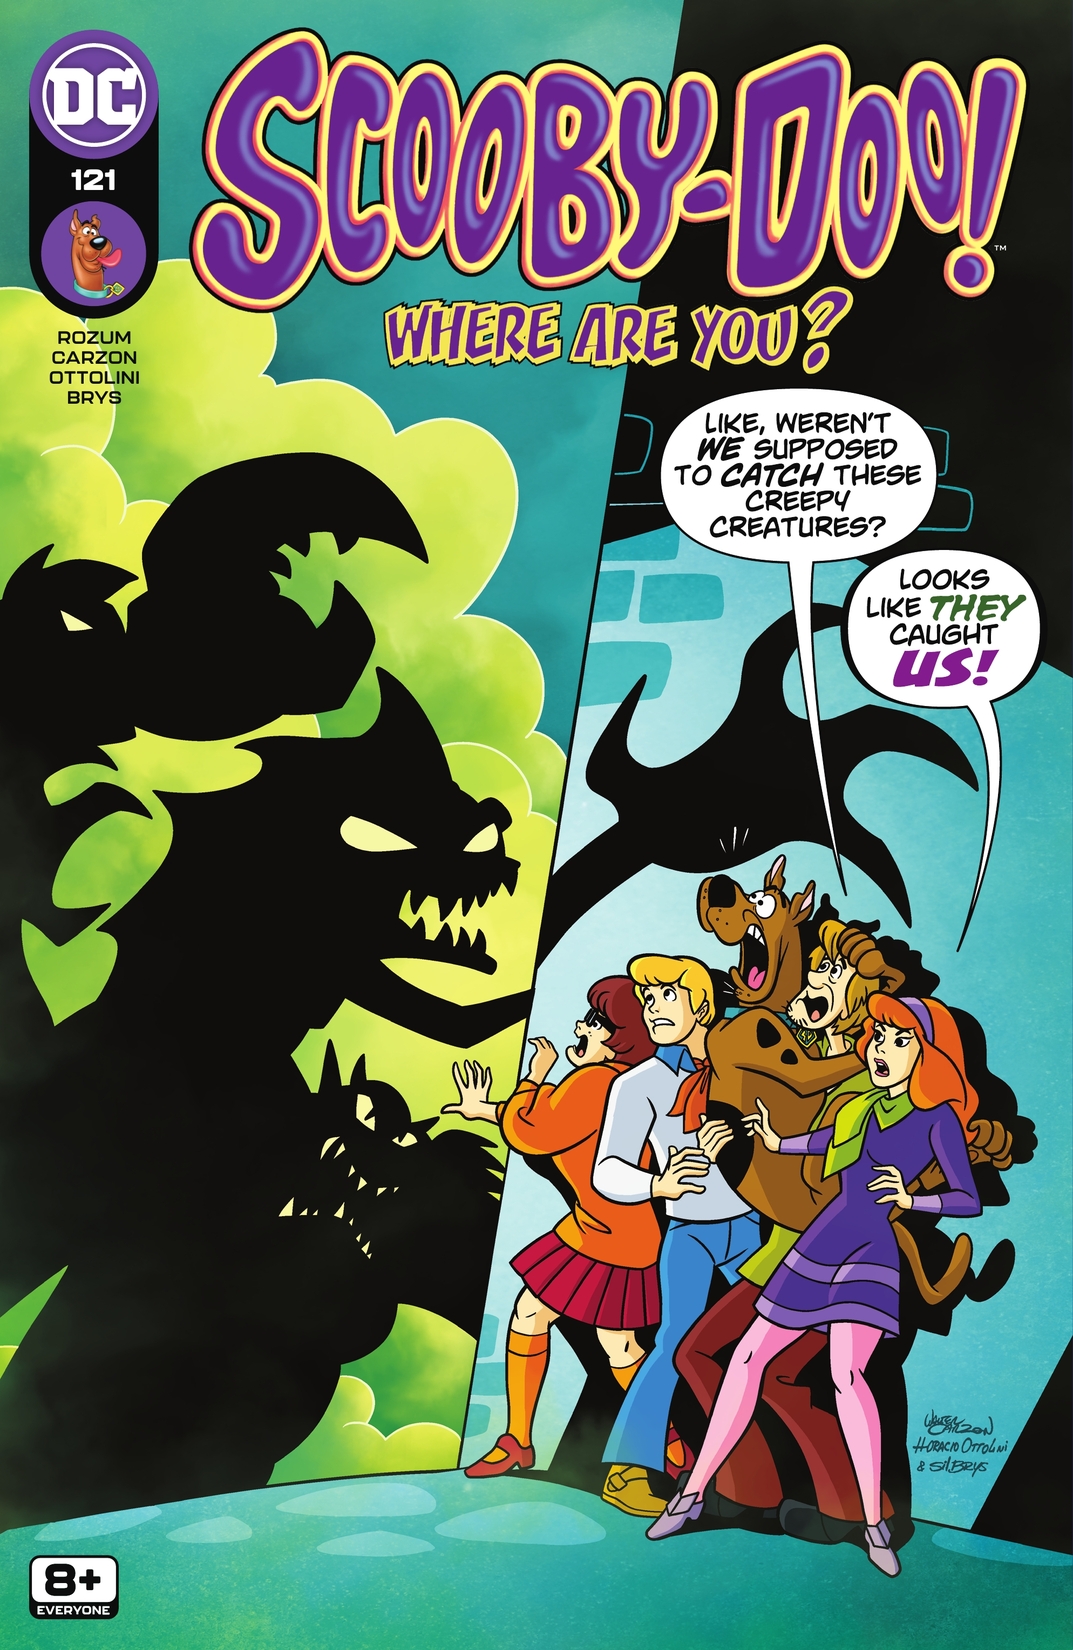 Scooby-Doo, Where Are You? #121 preview images